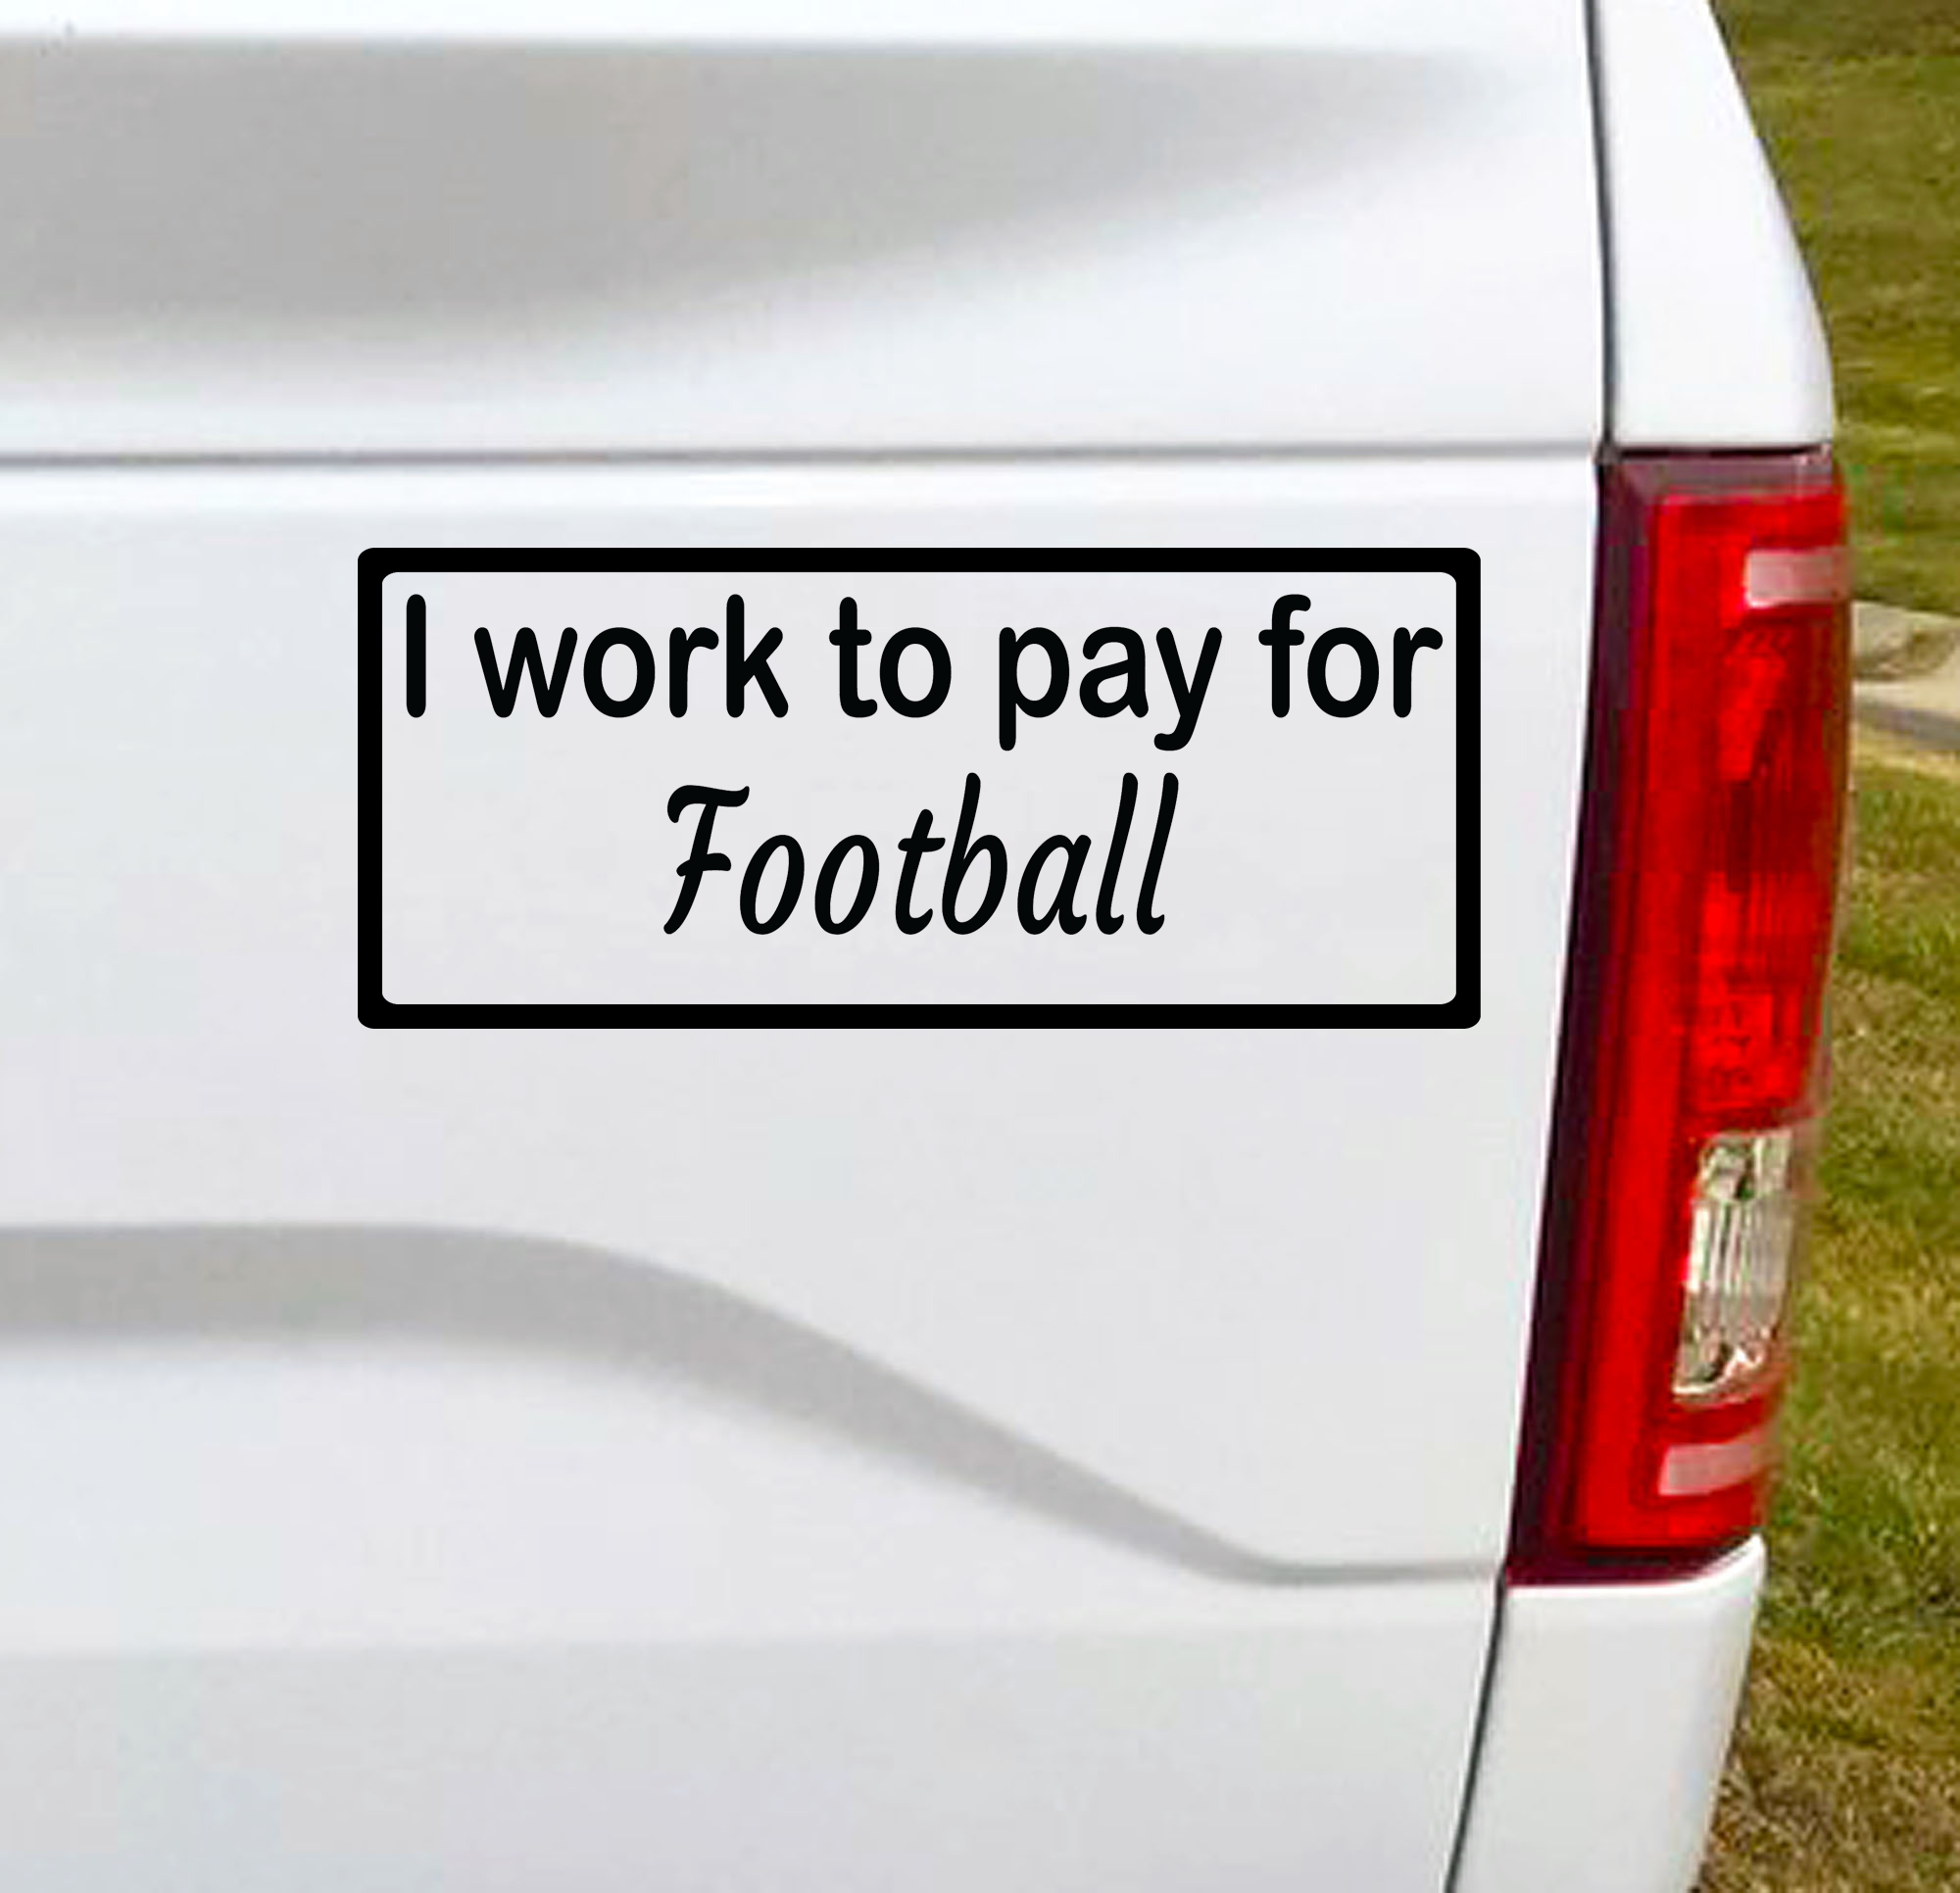 I work to pay for Football. Baseball? Hockey? You fill in the blank. This funny car vinyl decal bumper sticker will surely get a laugh out of your fellow drivers.  7"W x 3"H Funny Car Decal, Car Sticker, Car Vinyl, Bumper Sticker, Vinyl Stickers, Vinyl Sticker.